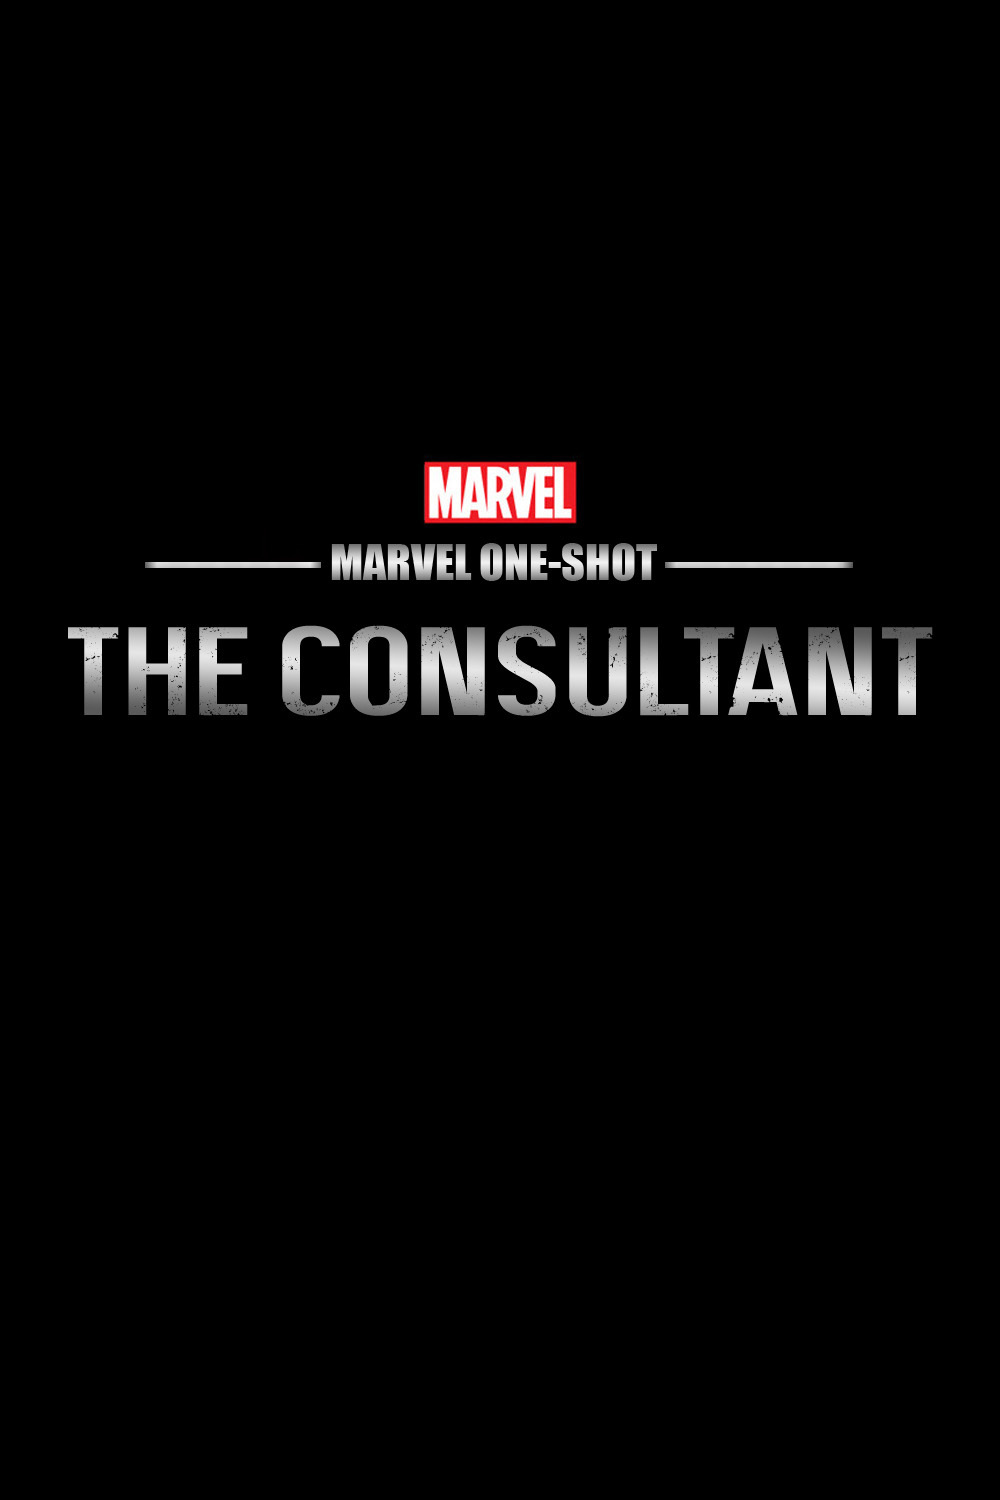 Marvel One-Shot - The Consultant